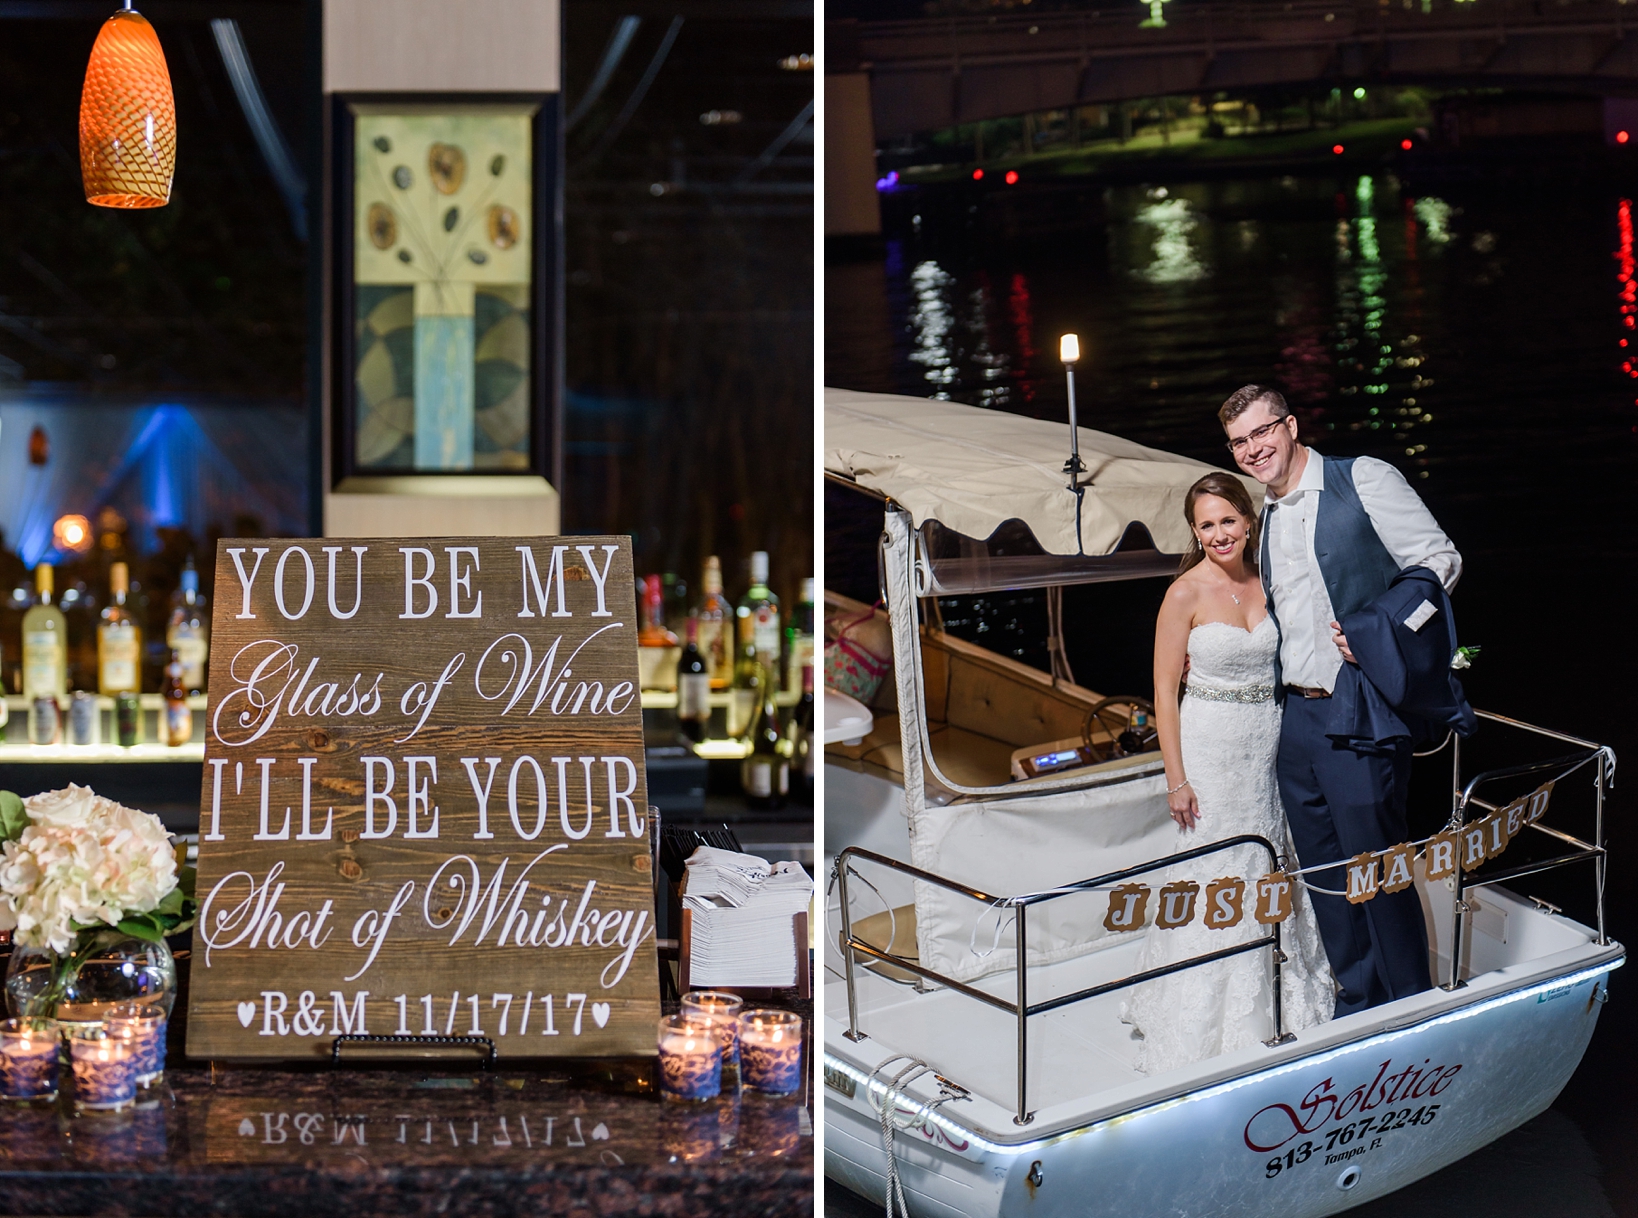 Bride and Groom leave the party on a boat in the Hillsborough River after their reception by Sarah & Ben Photography